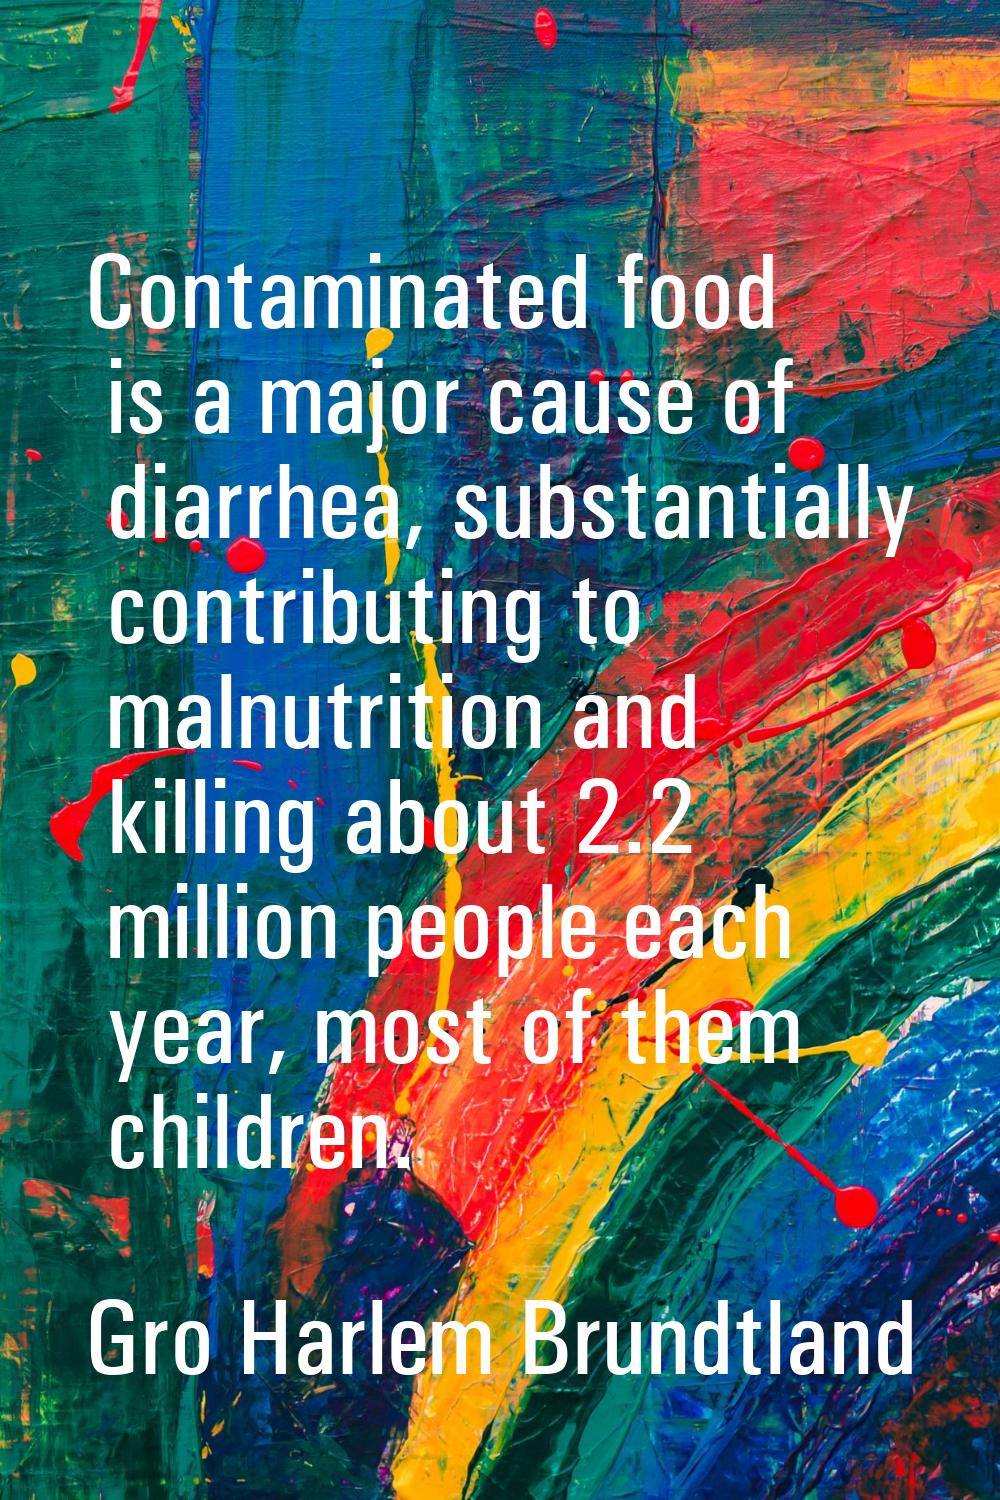 Contaminated food is a major cause of diarrhea, substantially contributing to malnutrition and kill